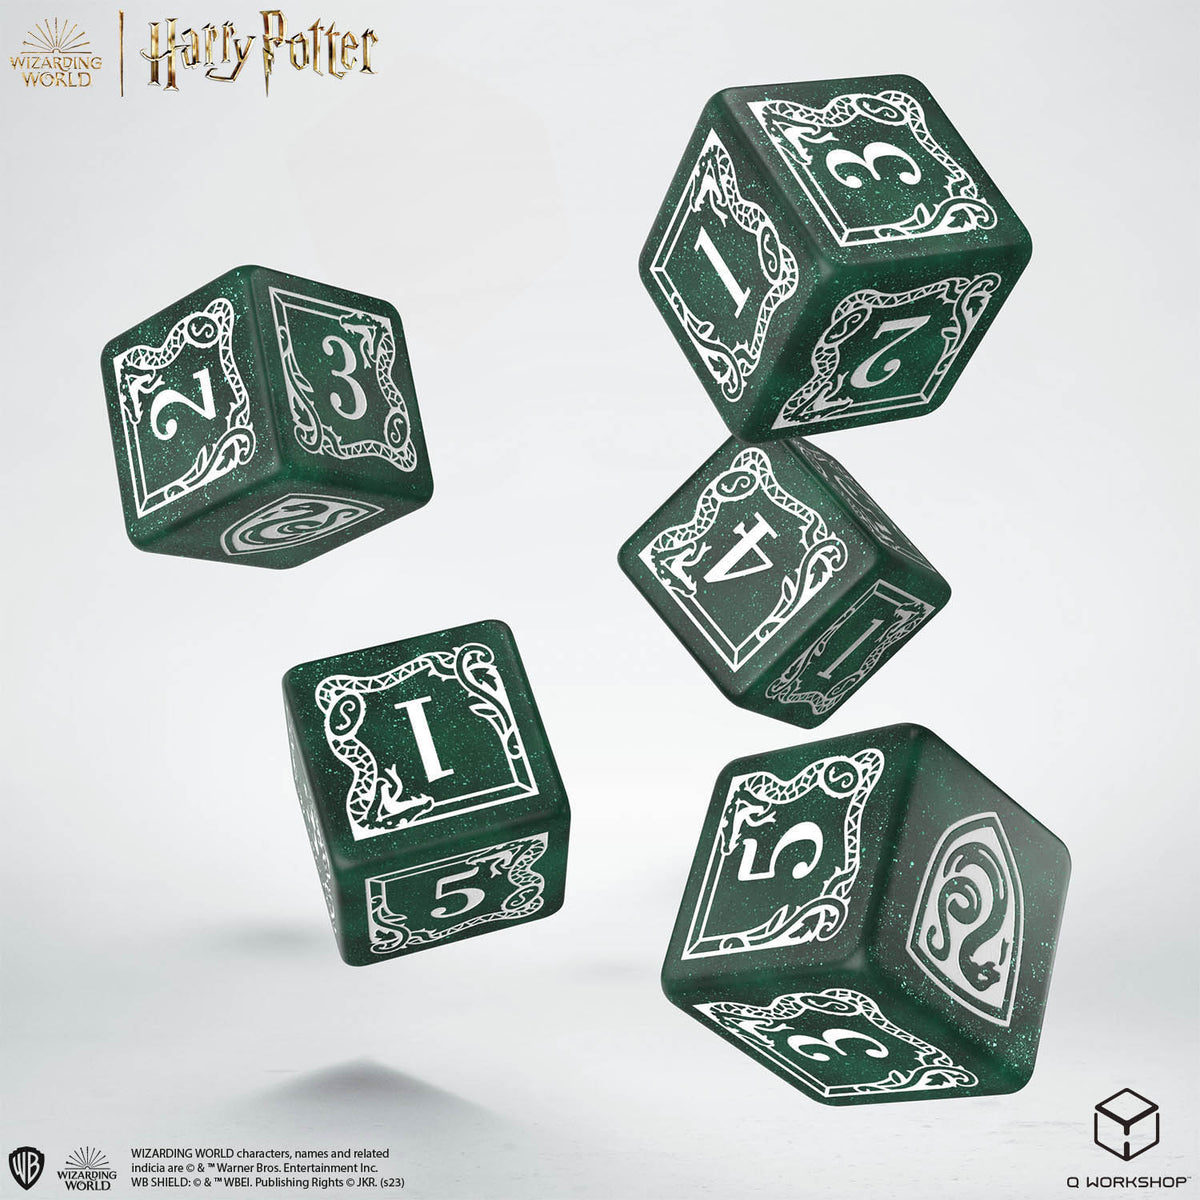 Q Workshop - Harry Potter Slytherin Dice and Pouch